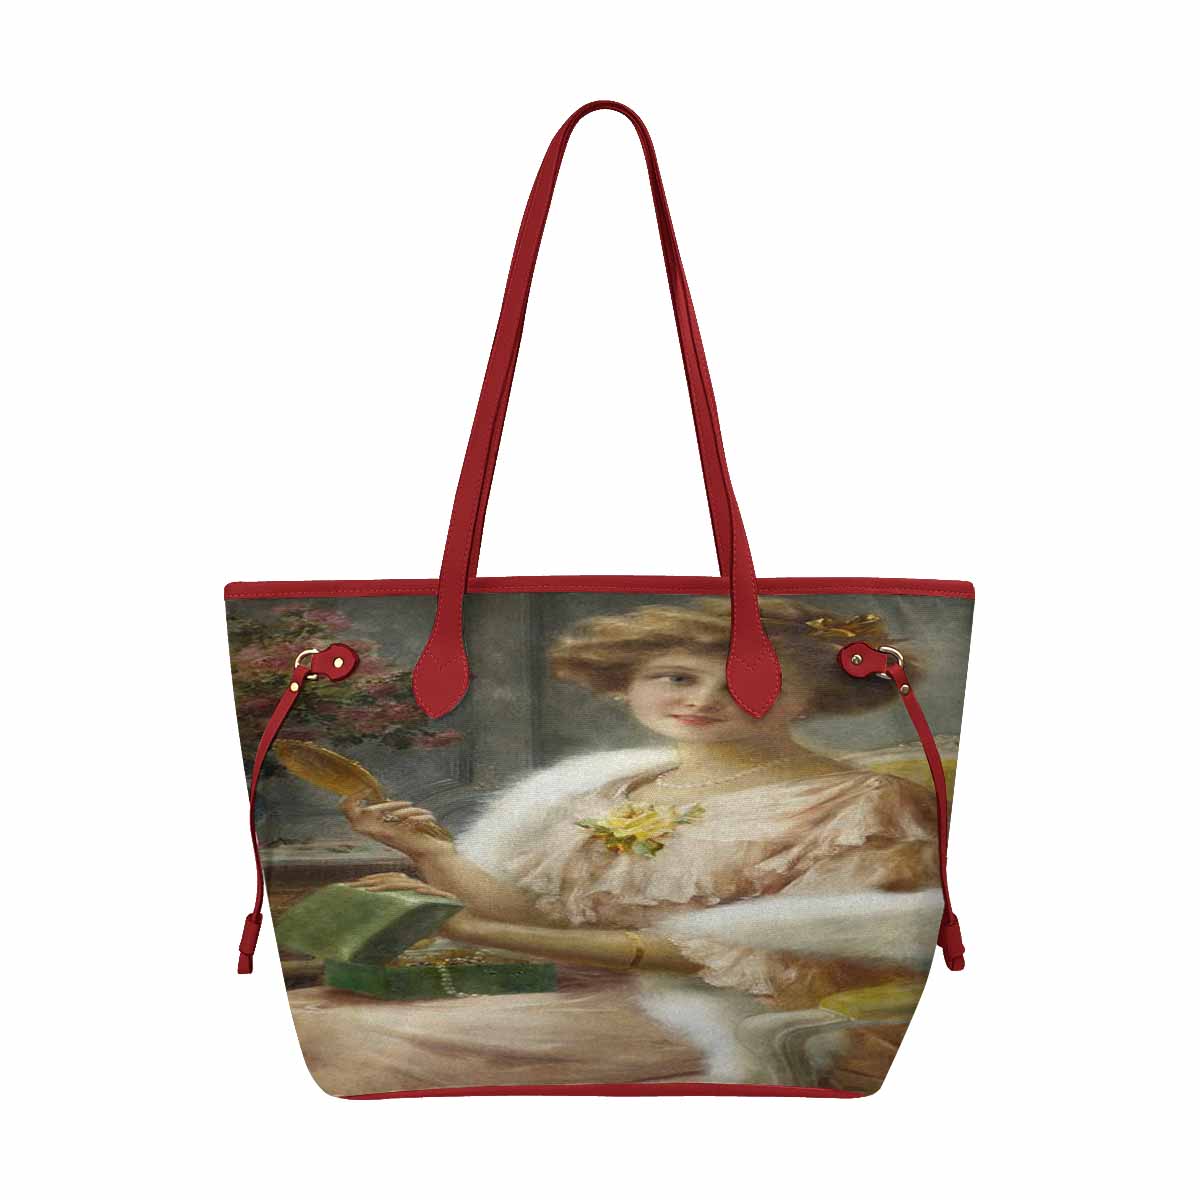 Victorian Lady Design Handbag, Model 1695361, A Young Lady With A Mirror, RED TRIM